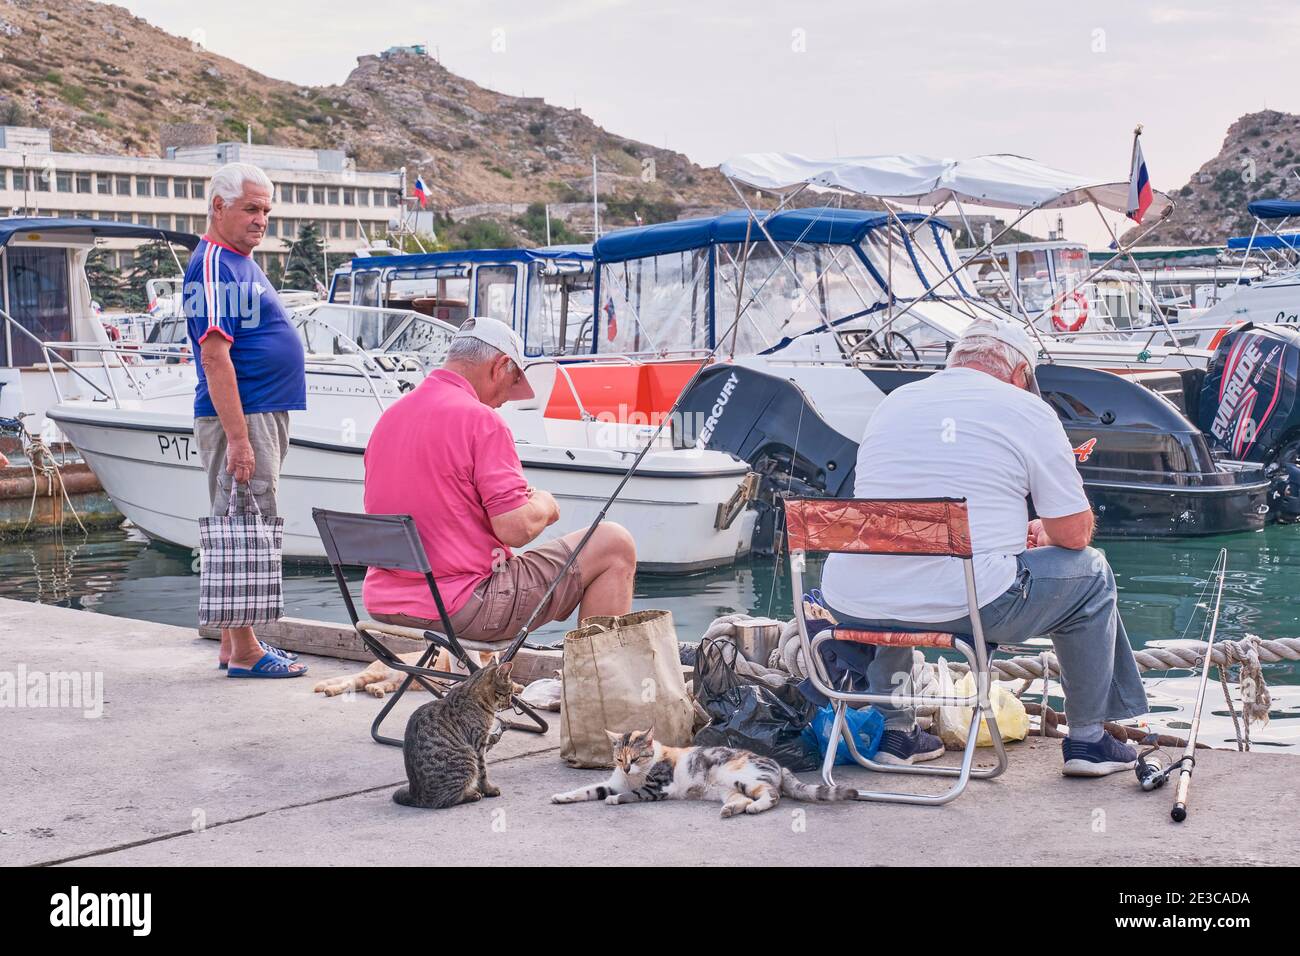 Sevastopol, Russia - January 7, 2020: Two male fishermen in casual clothes sit on folding chairs on the dock and fish. Several cute cats nearby are wa Stock Photo